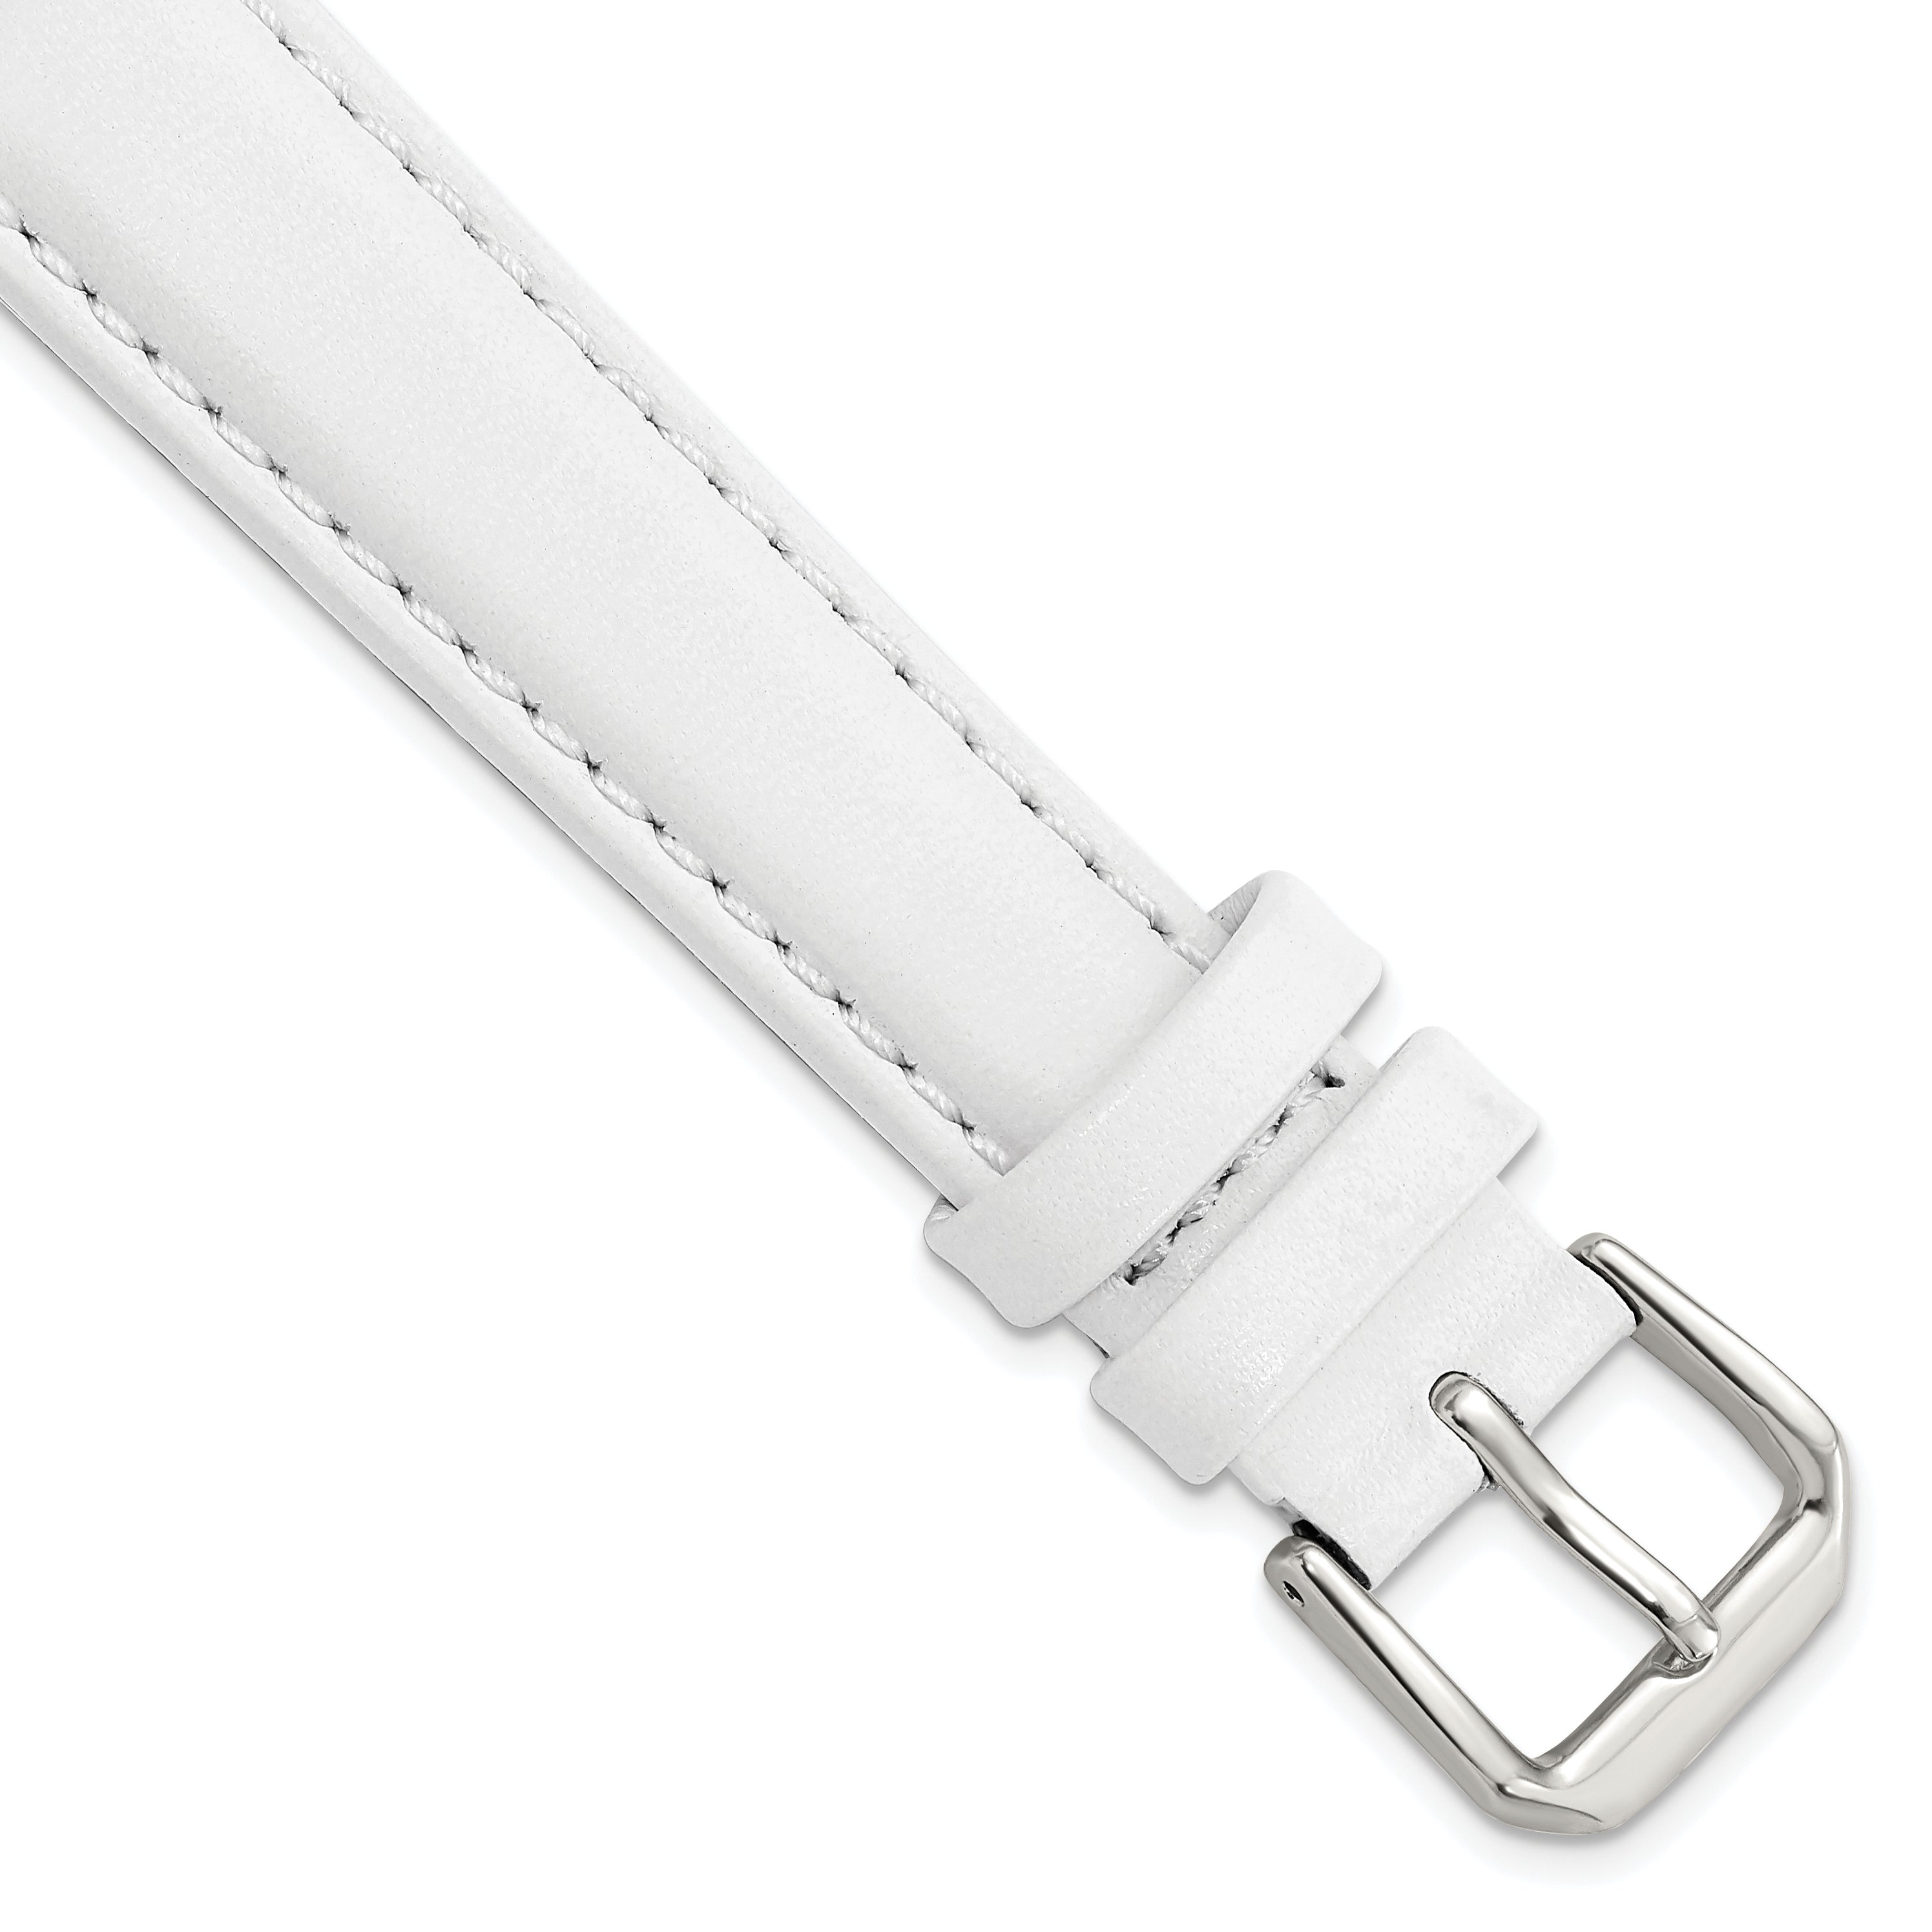 DeBeer 14mm White Smooth Leather with Silver-tone Buckle 6.75 inch Watch Band